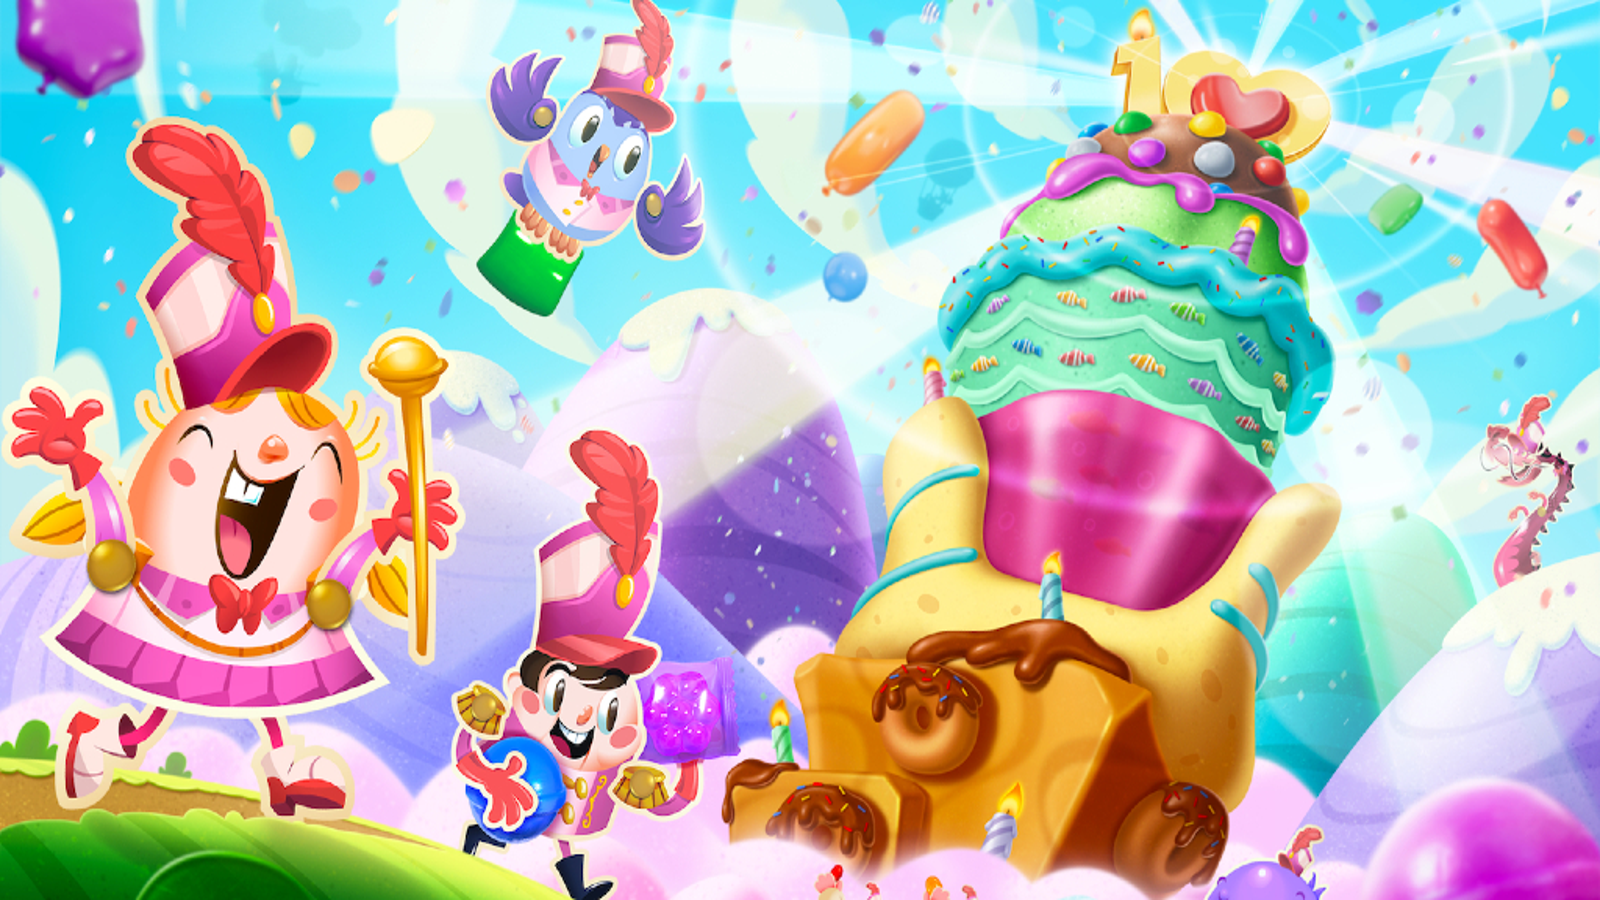 Did you know? There's an exclusive - Candy Crush Soda Saga